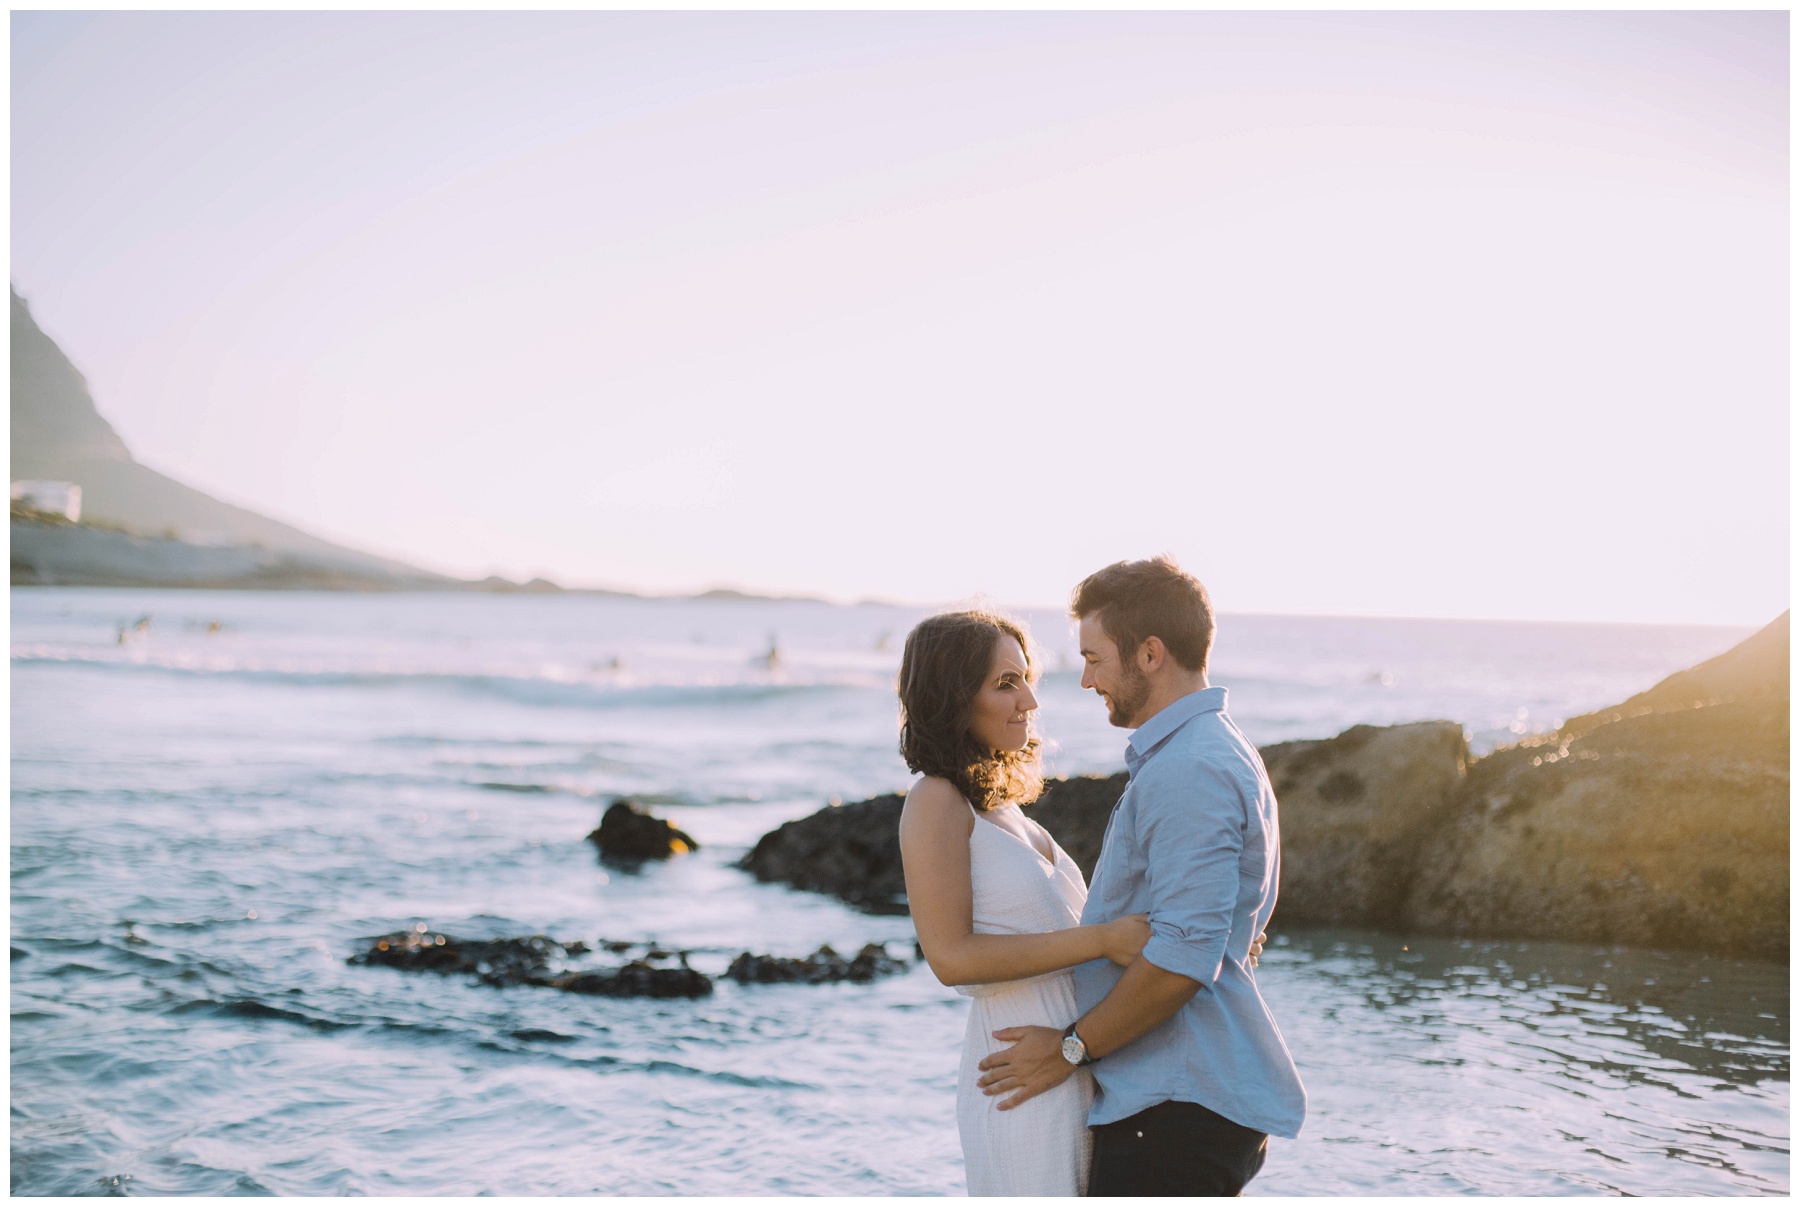 Ronel Kruger Cape Town Wedding and Lifestyle Photographer_8448.jpg